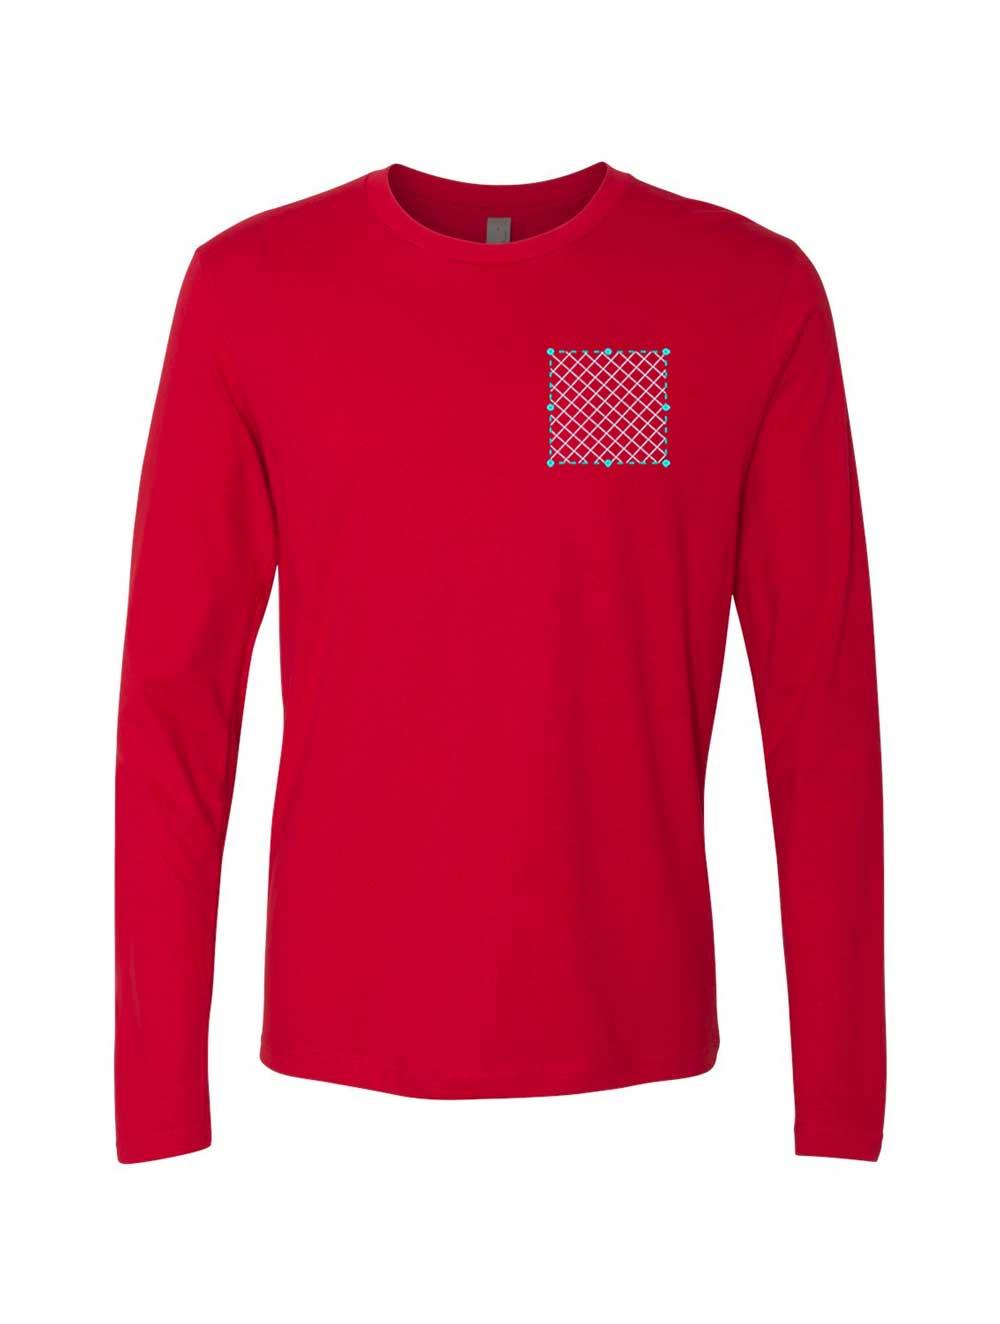 Embroidered Next Level Long Sleeve Shirt - Constantly Create Shop